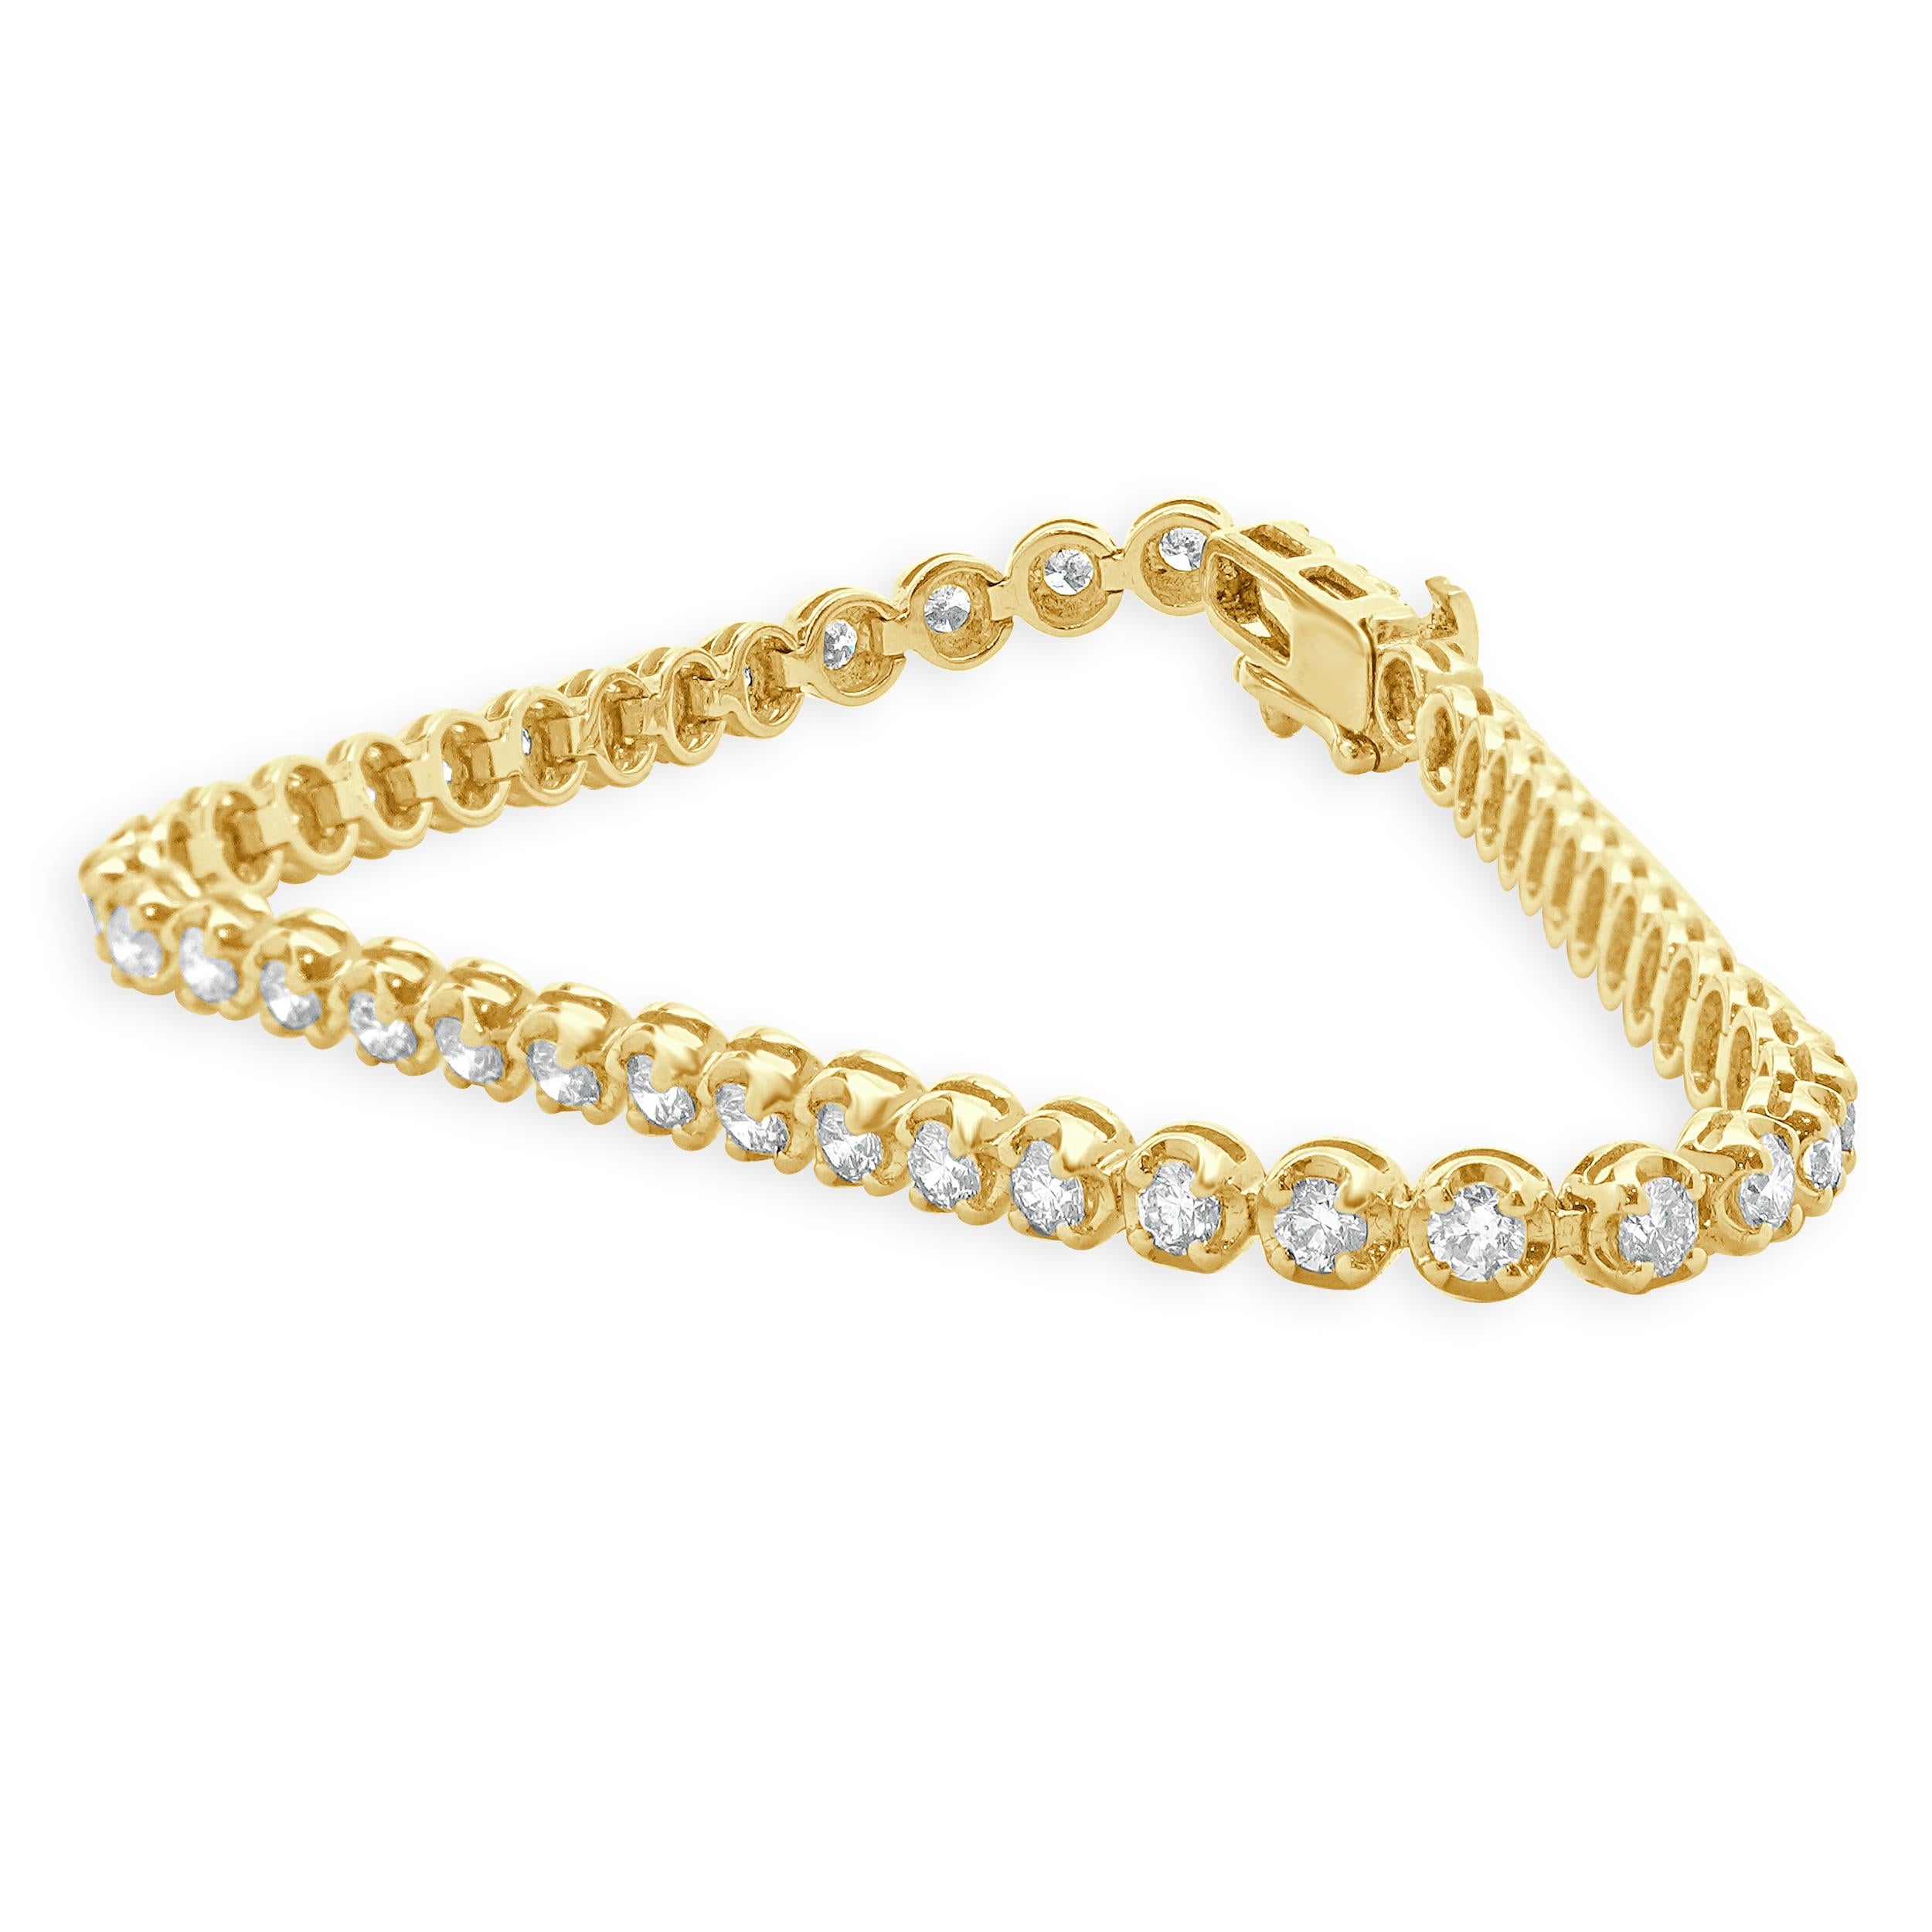 Designer: custom design
Material: 14K yellow gold
Diamond: 47 round brilliant cut = 3.00cttw
Color: G / H
Clarity: VS-SI1
Dimensions: bracelet will fit up to a 7-inch wrist
Weight: 7.37 grams
